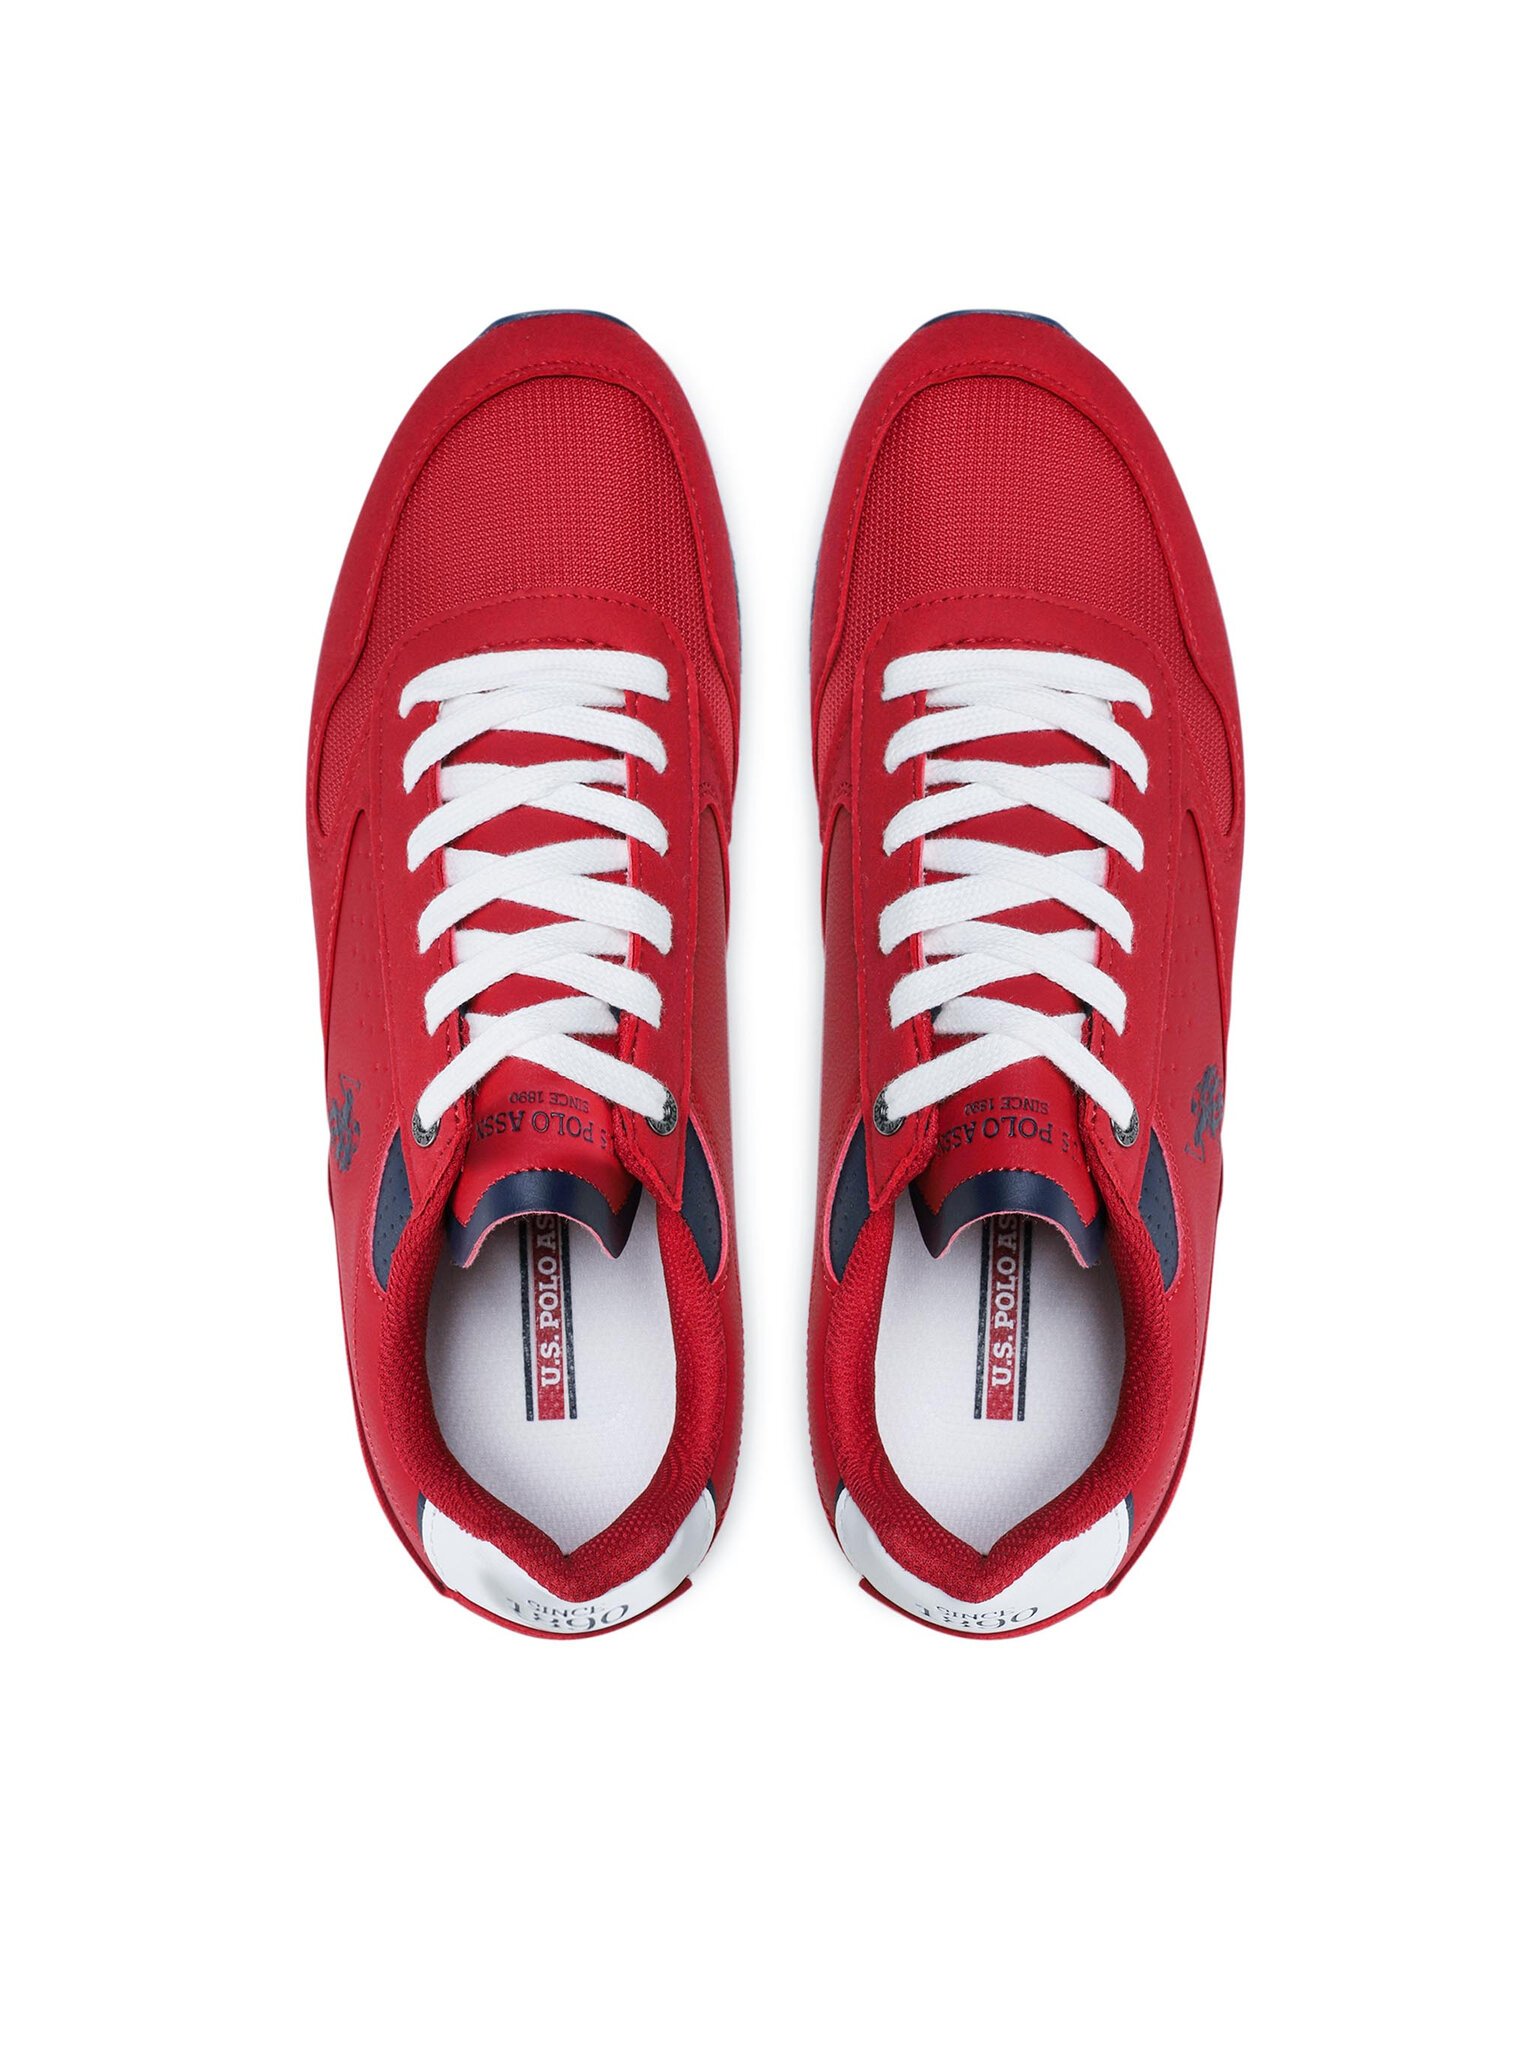 Sneakers / Sport  U.S. Polo Assn. NOBIL003A/2HY2 RED001 RED